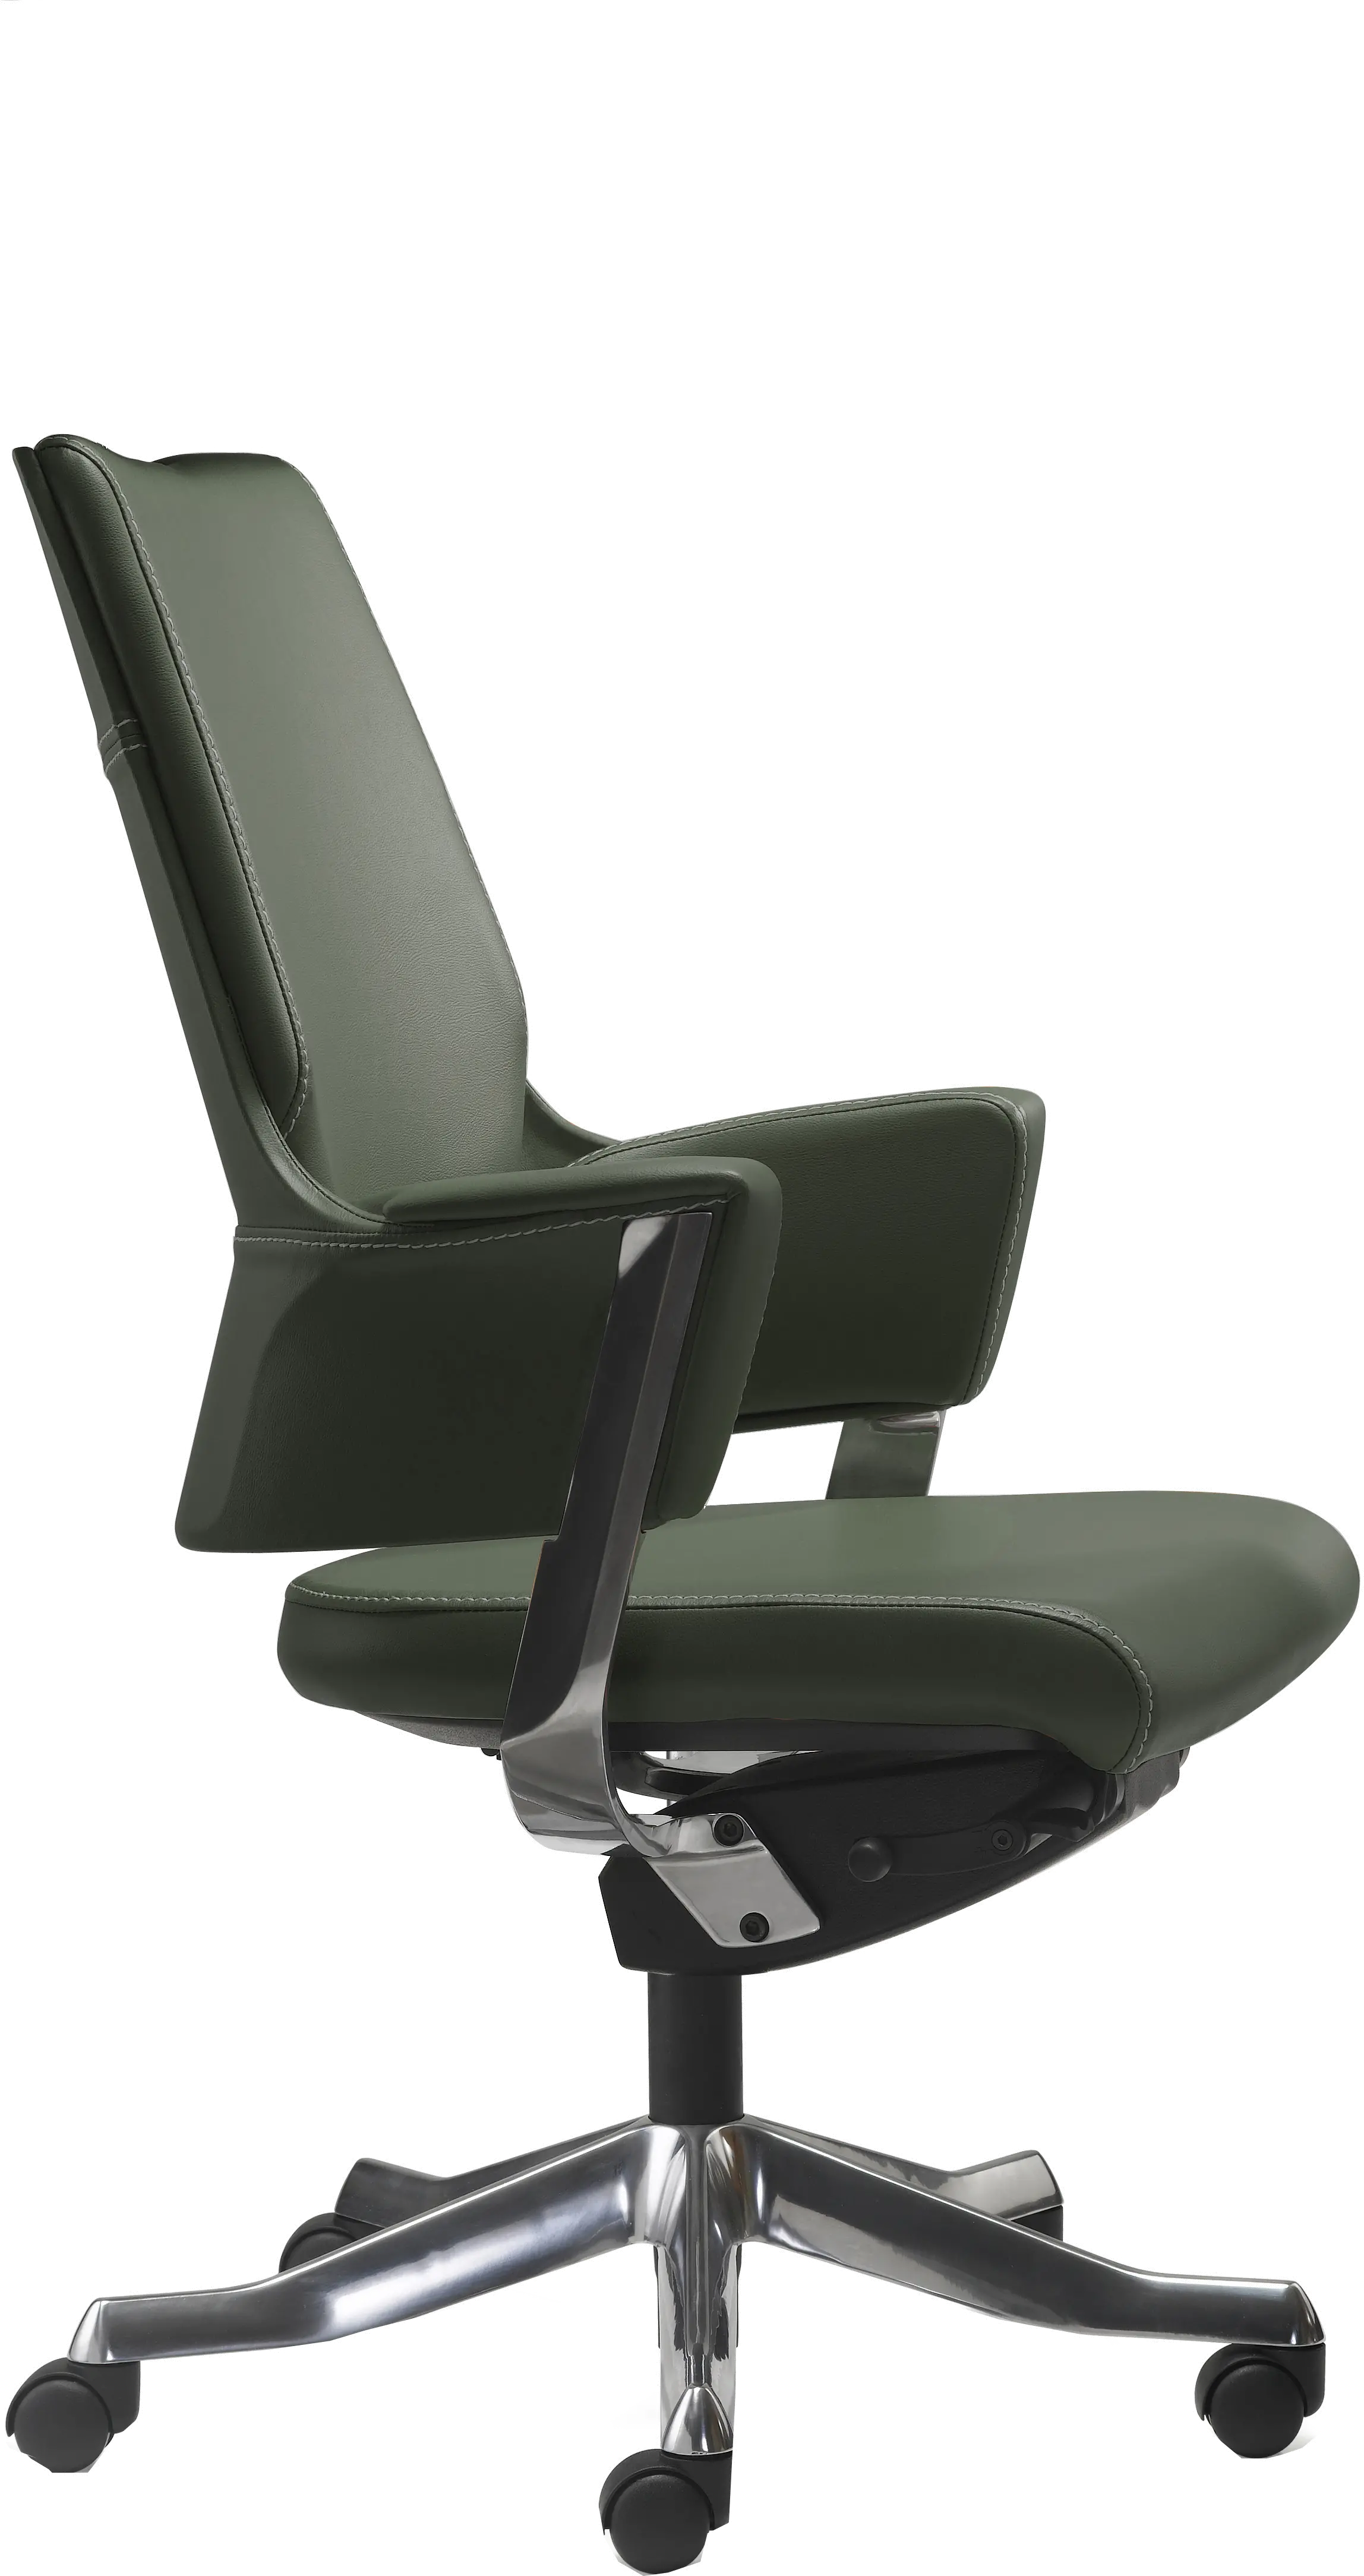 Gray Leather Office Chair - 5016